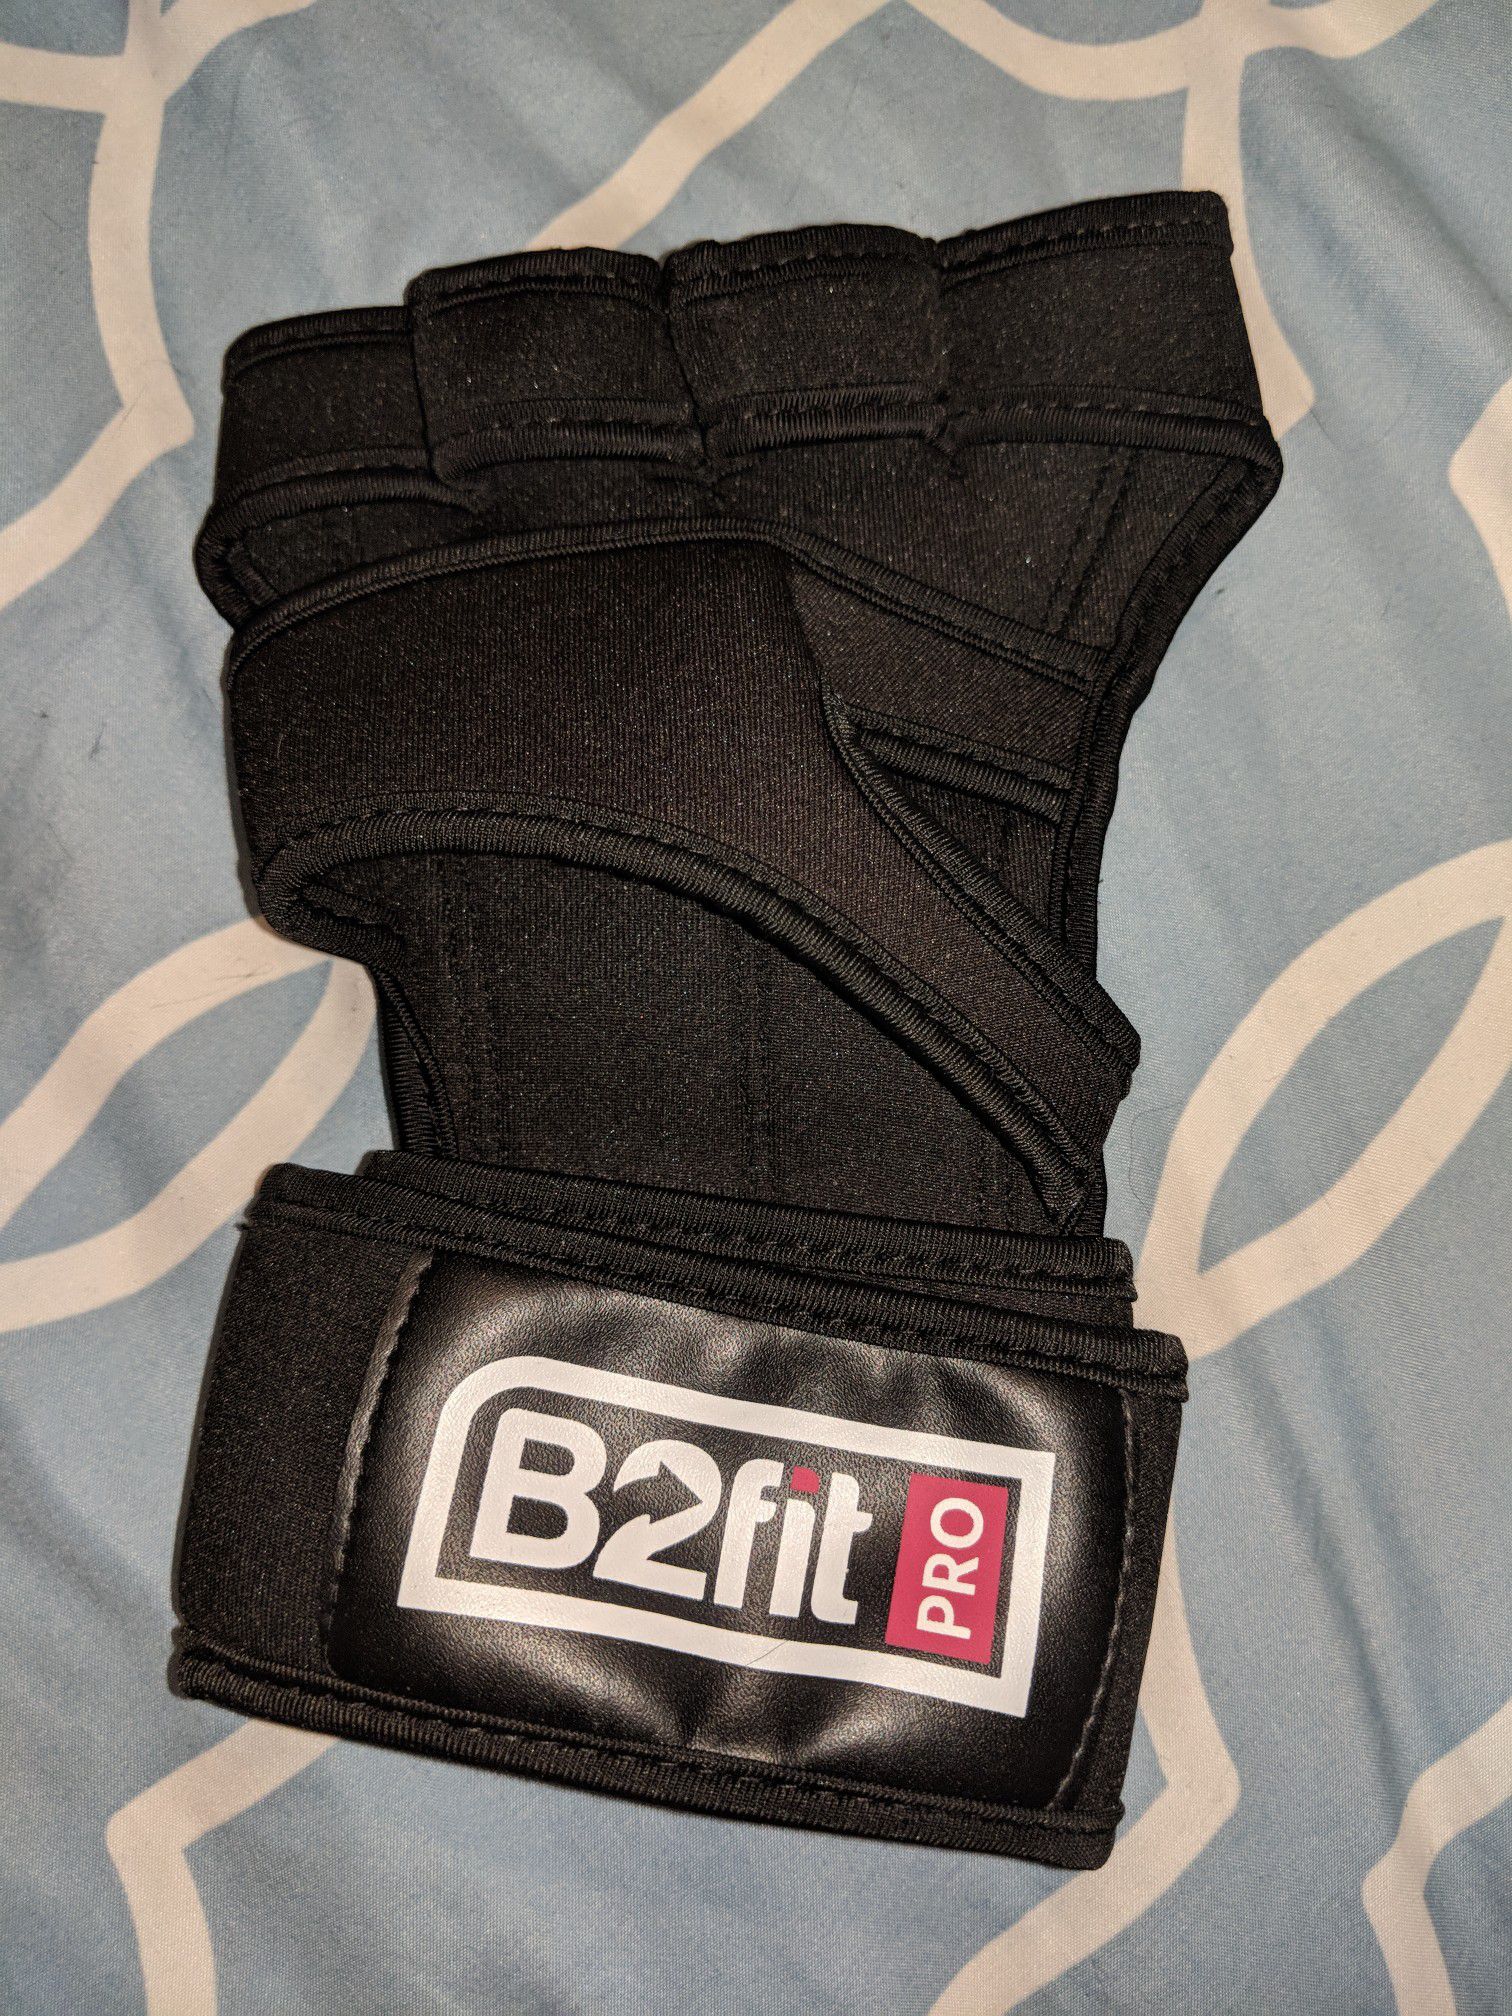 B2fit Pro Workout Glove Left Hand